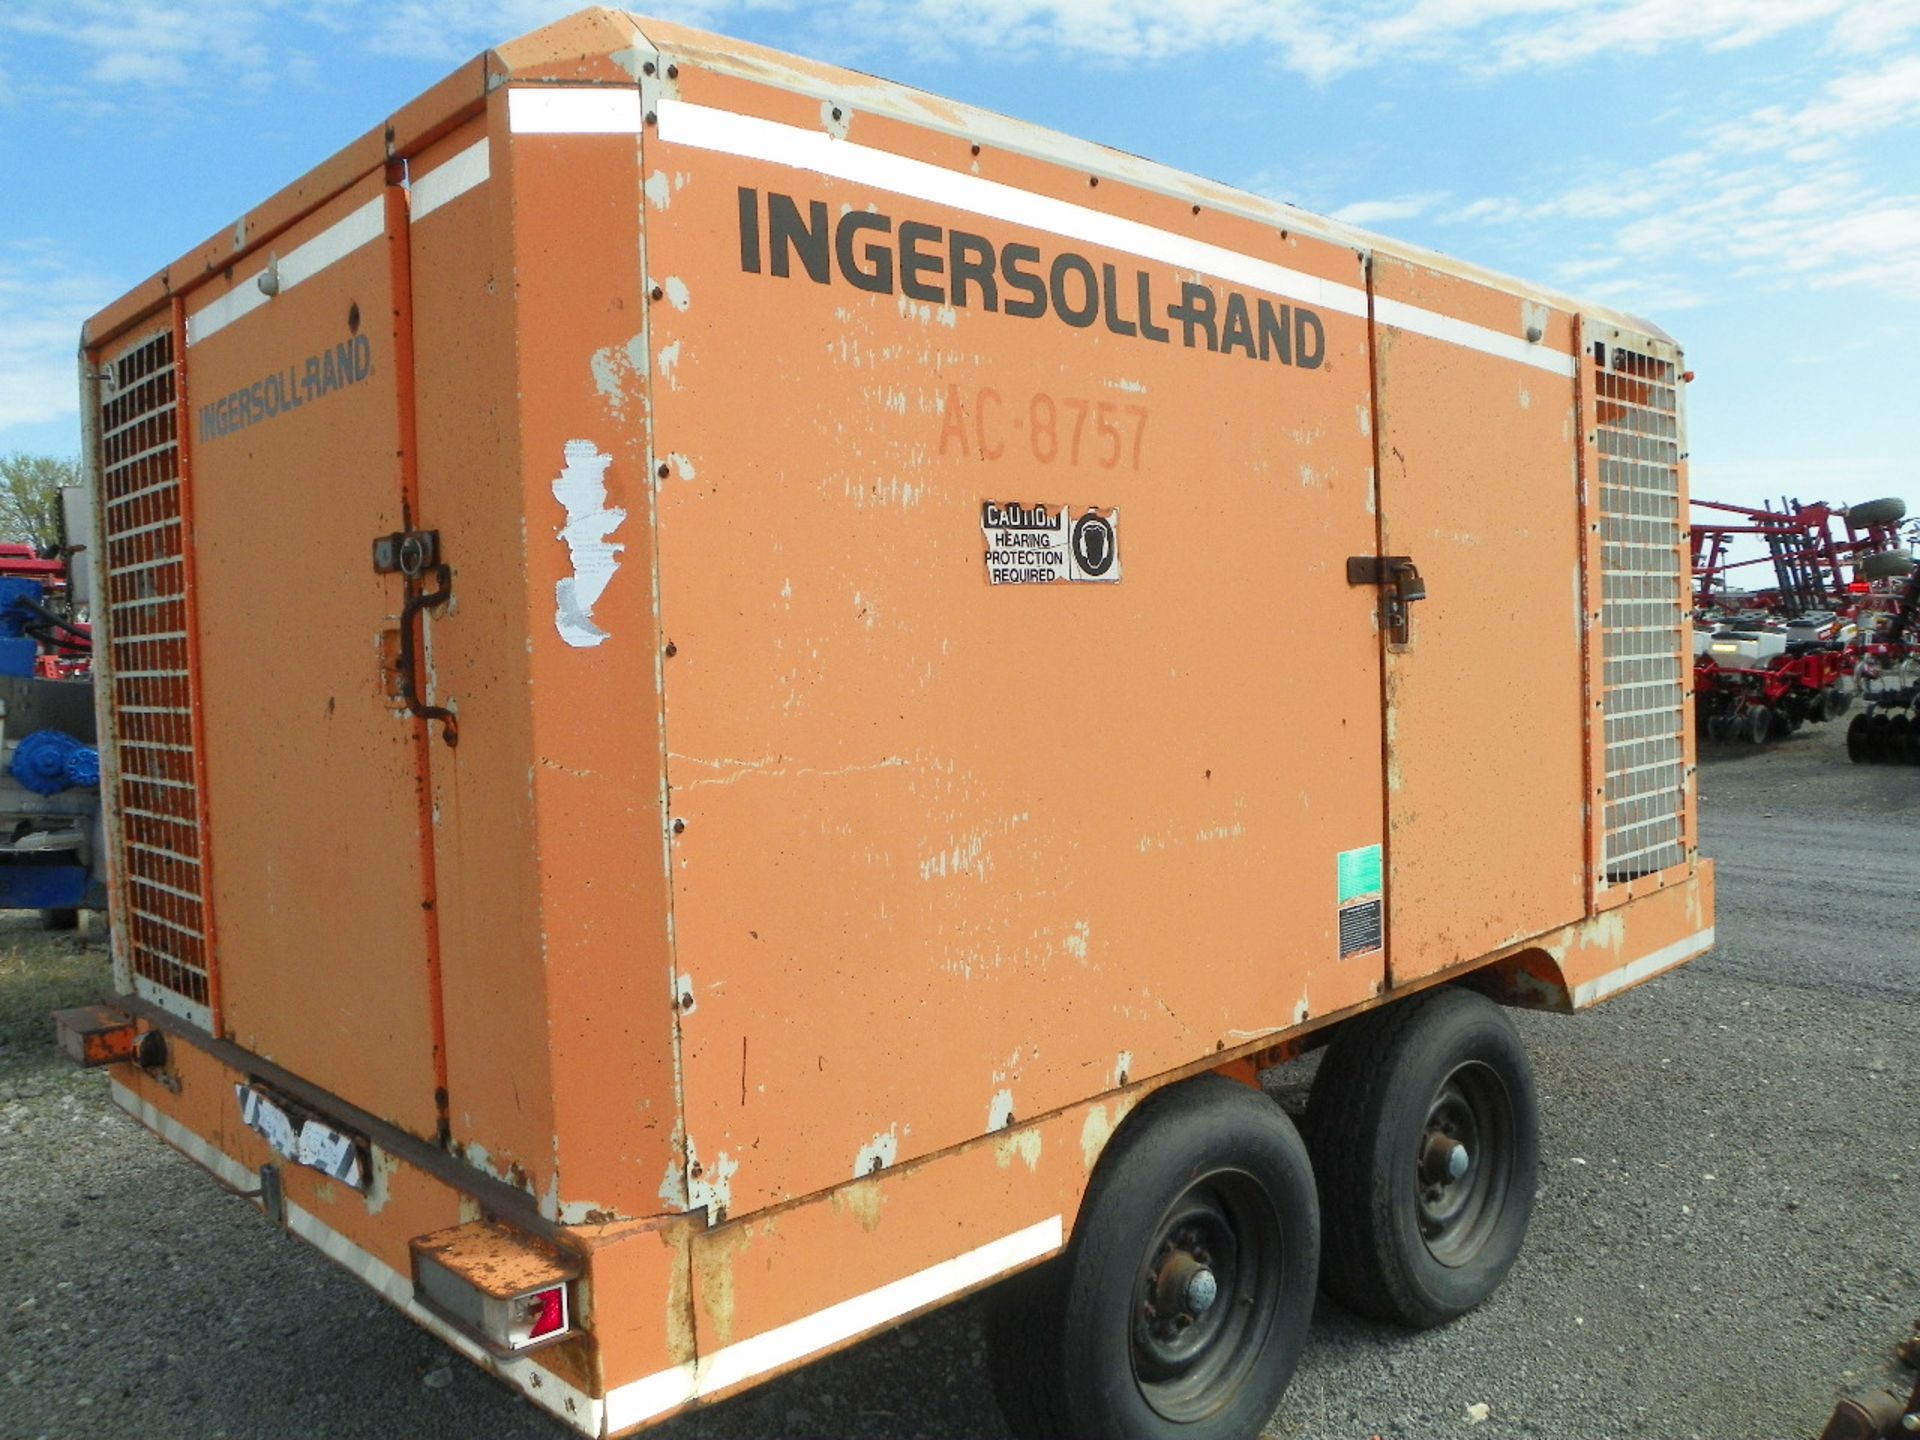 Ingersoll rand air compressor - Image 7 of 8